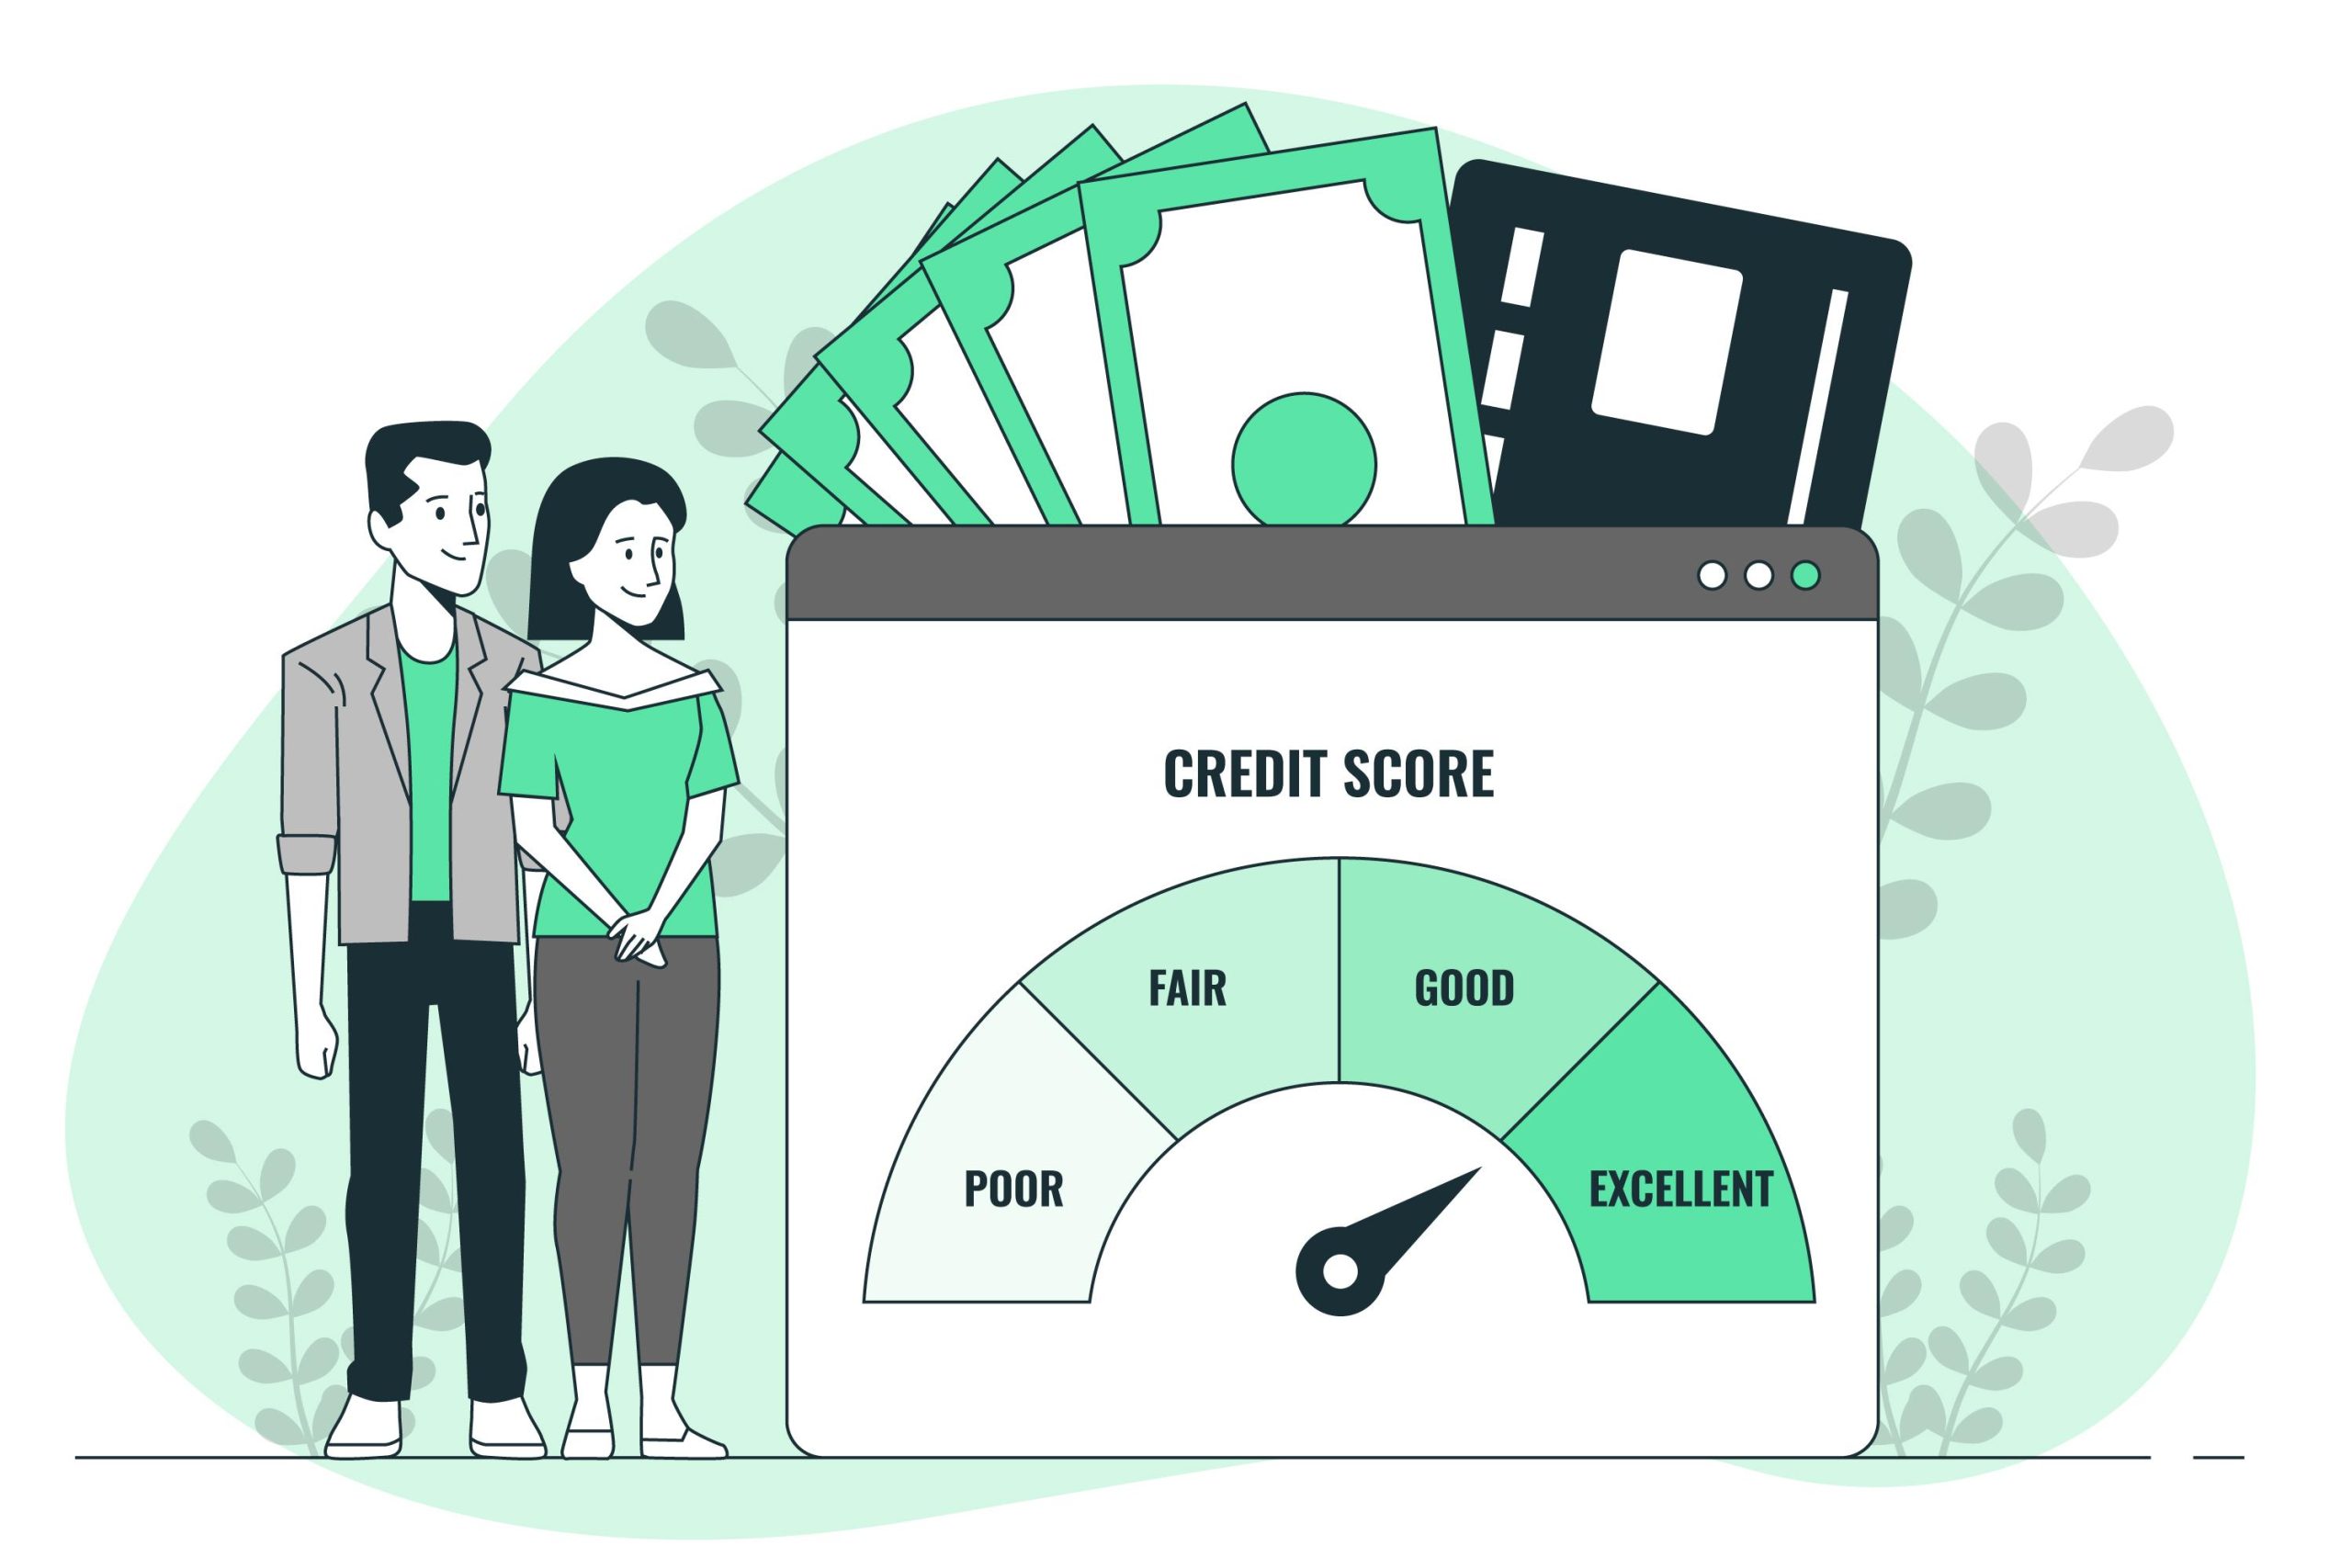 What Is Not a Benefit of Having a Good Credit Score